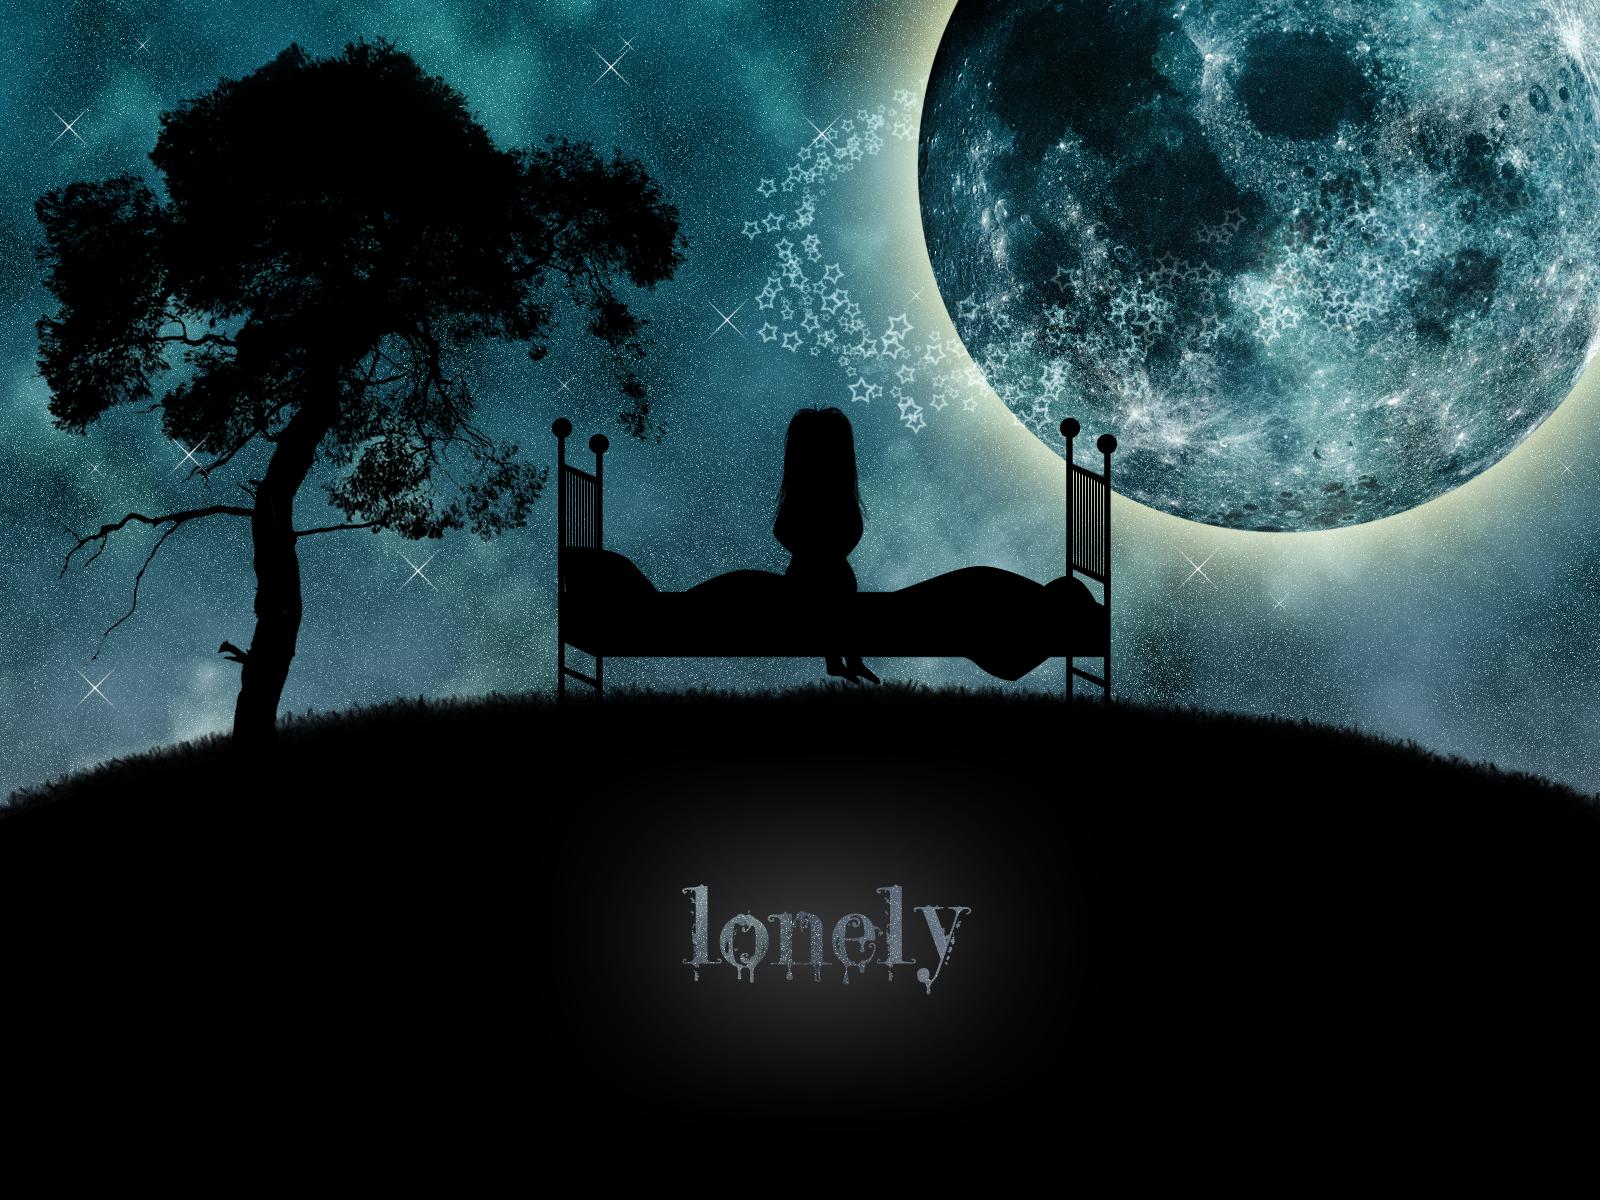  Lonely  by nastiab